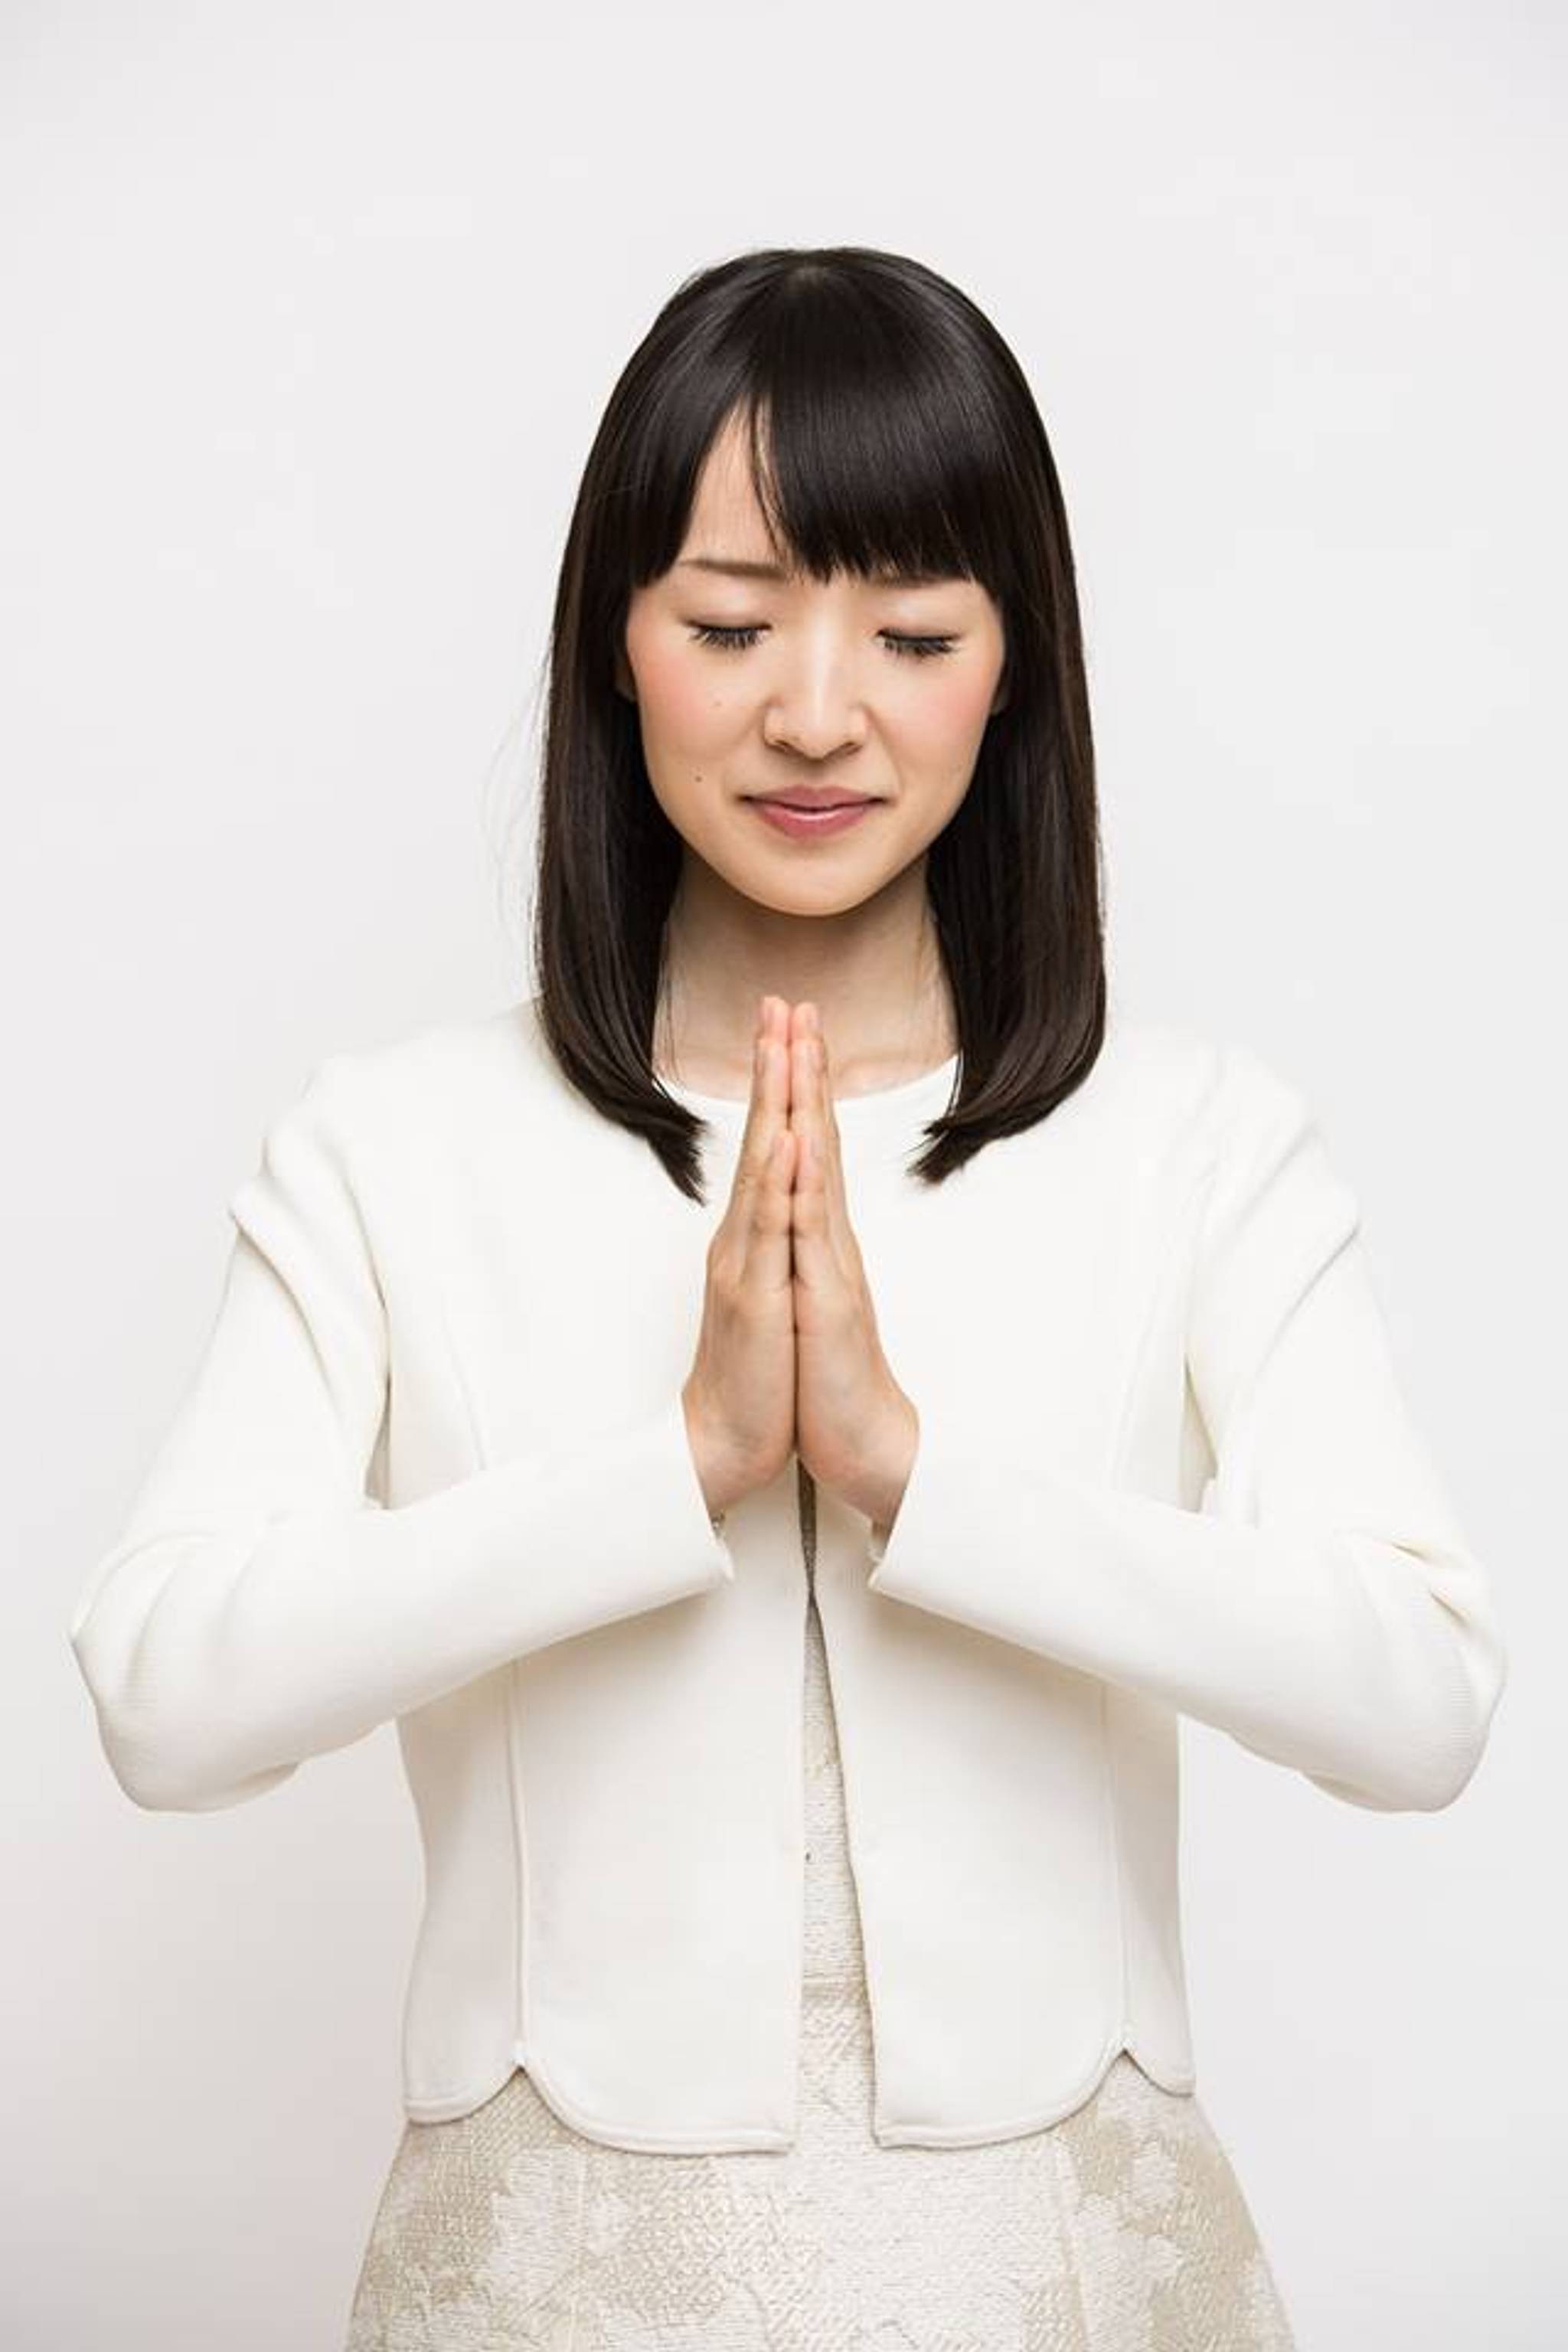 Marie Kondo faces criticism for selling out 'Brand Japan'